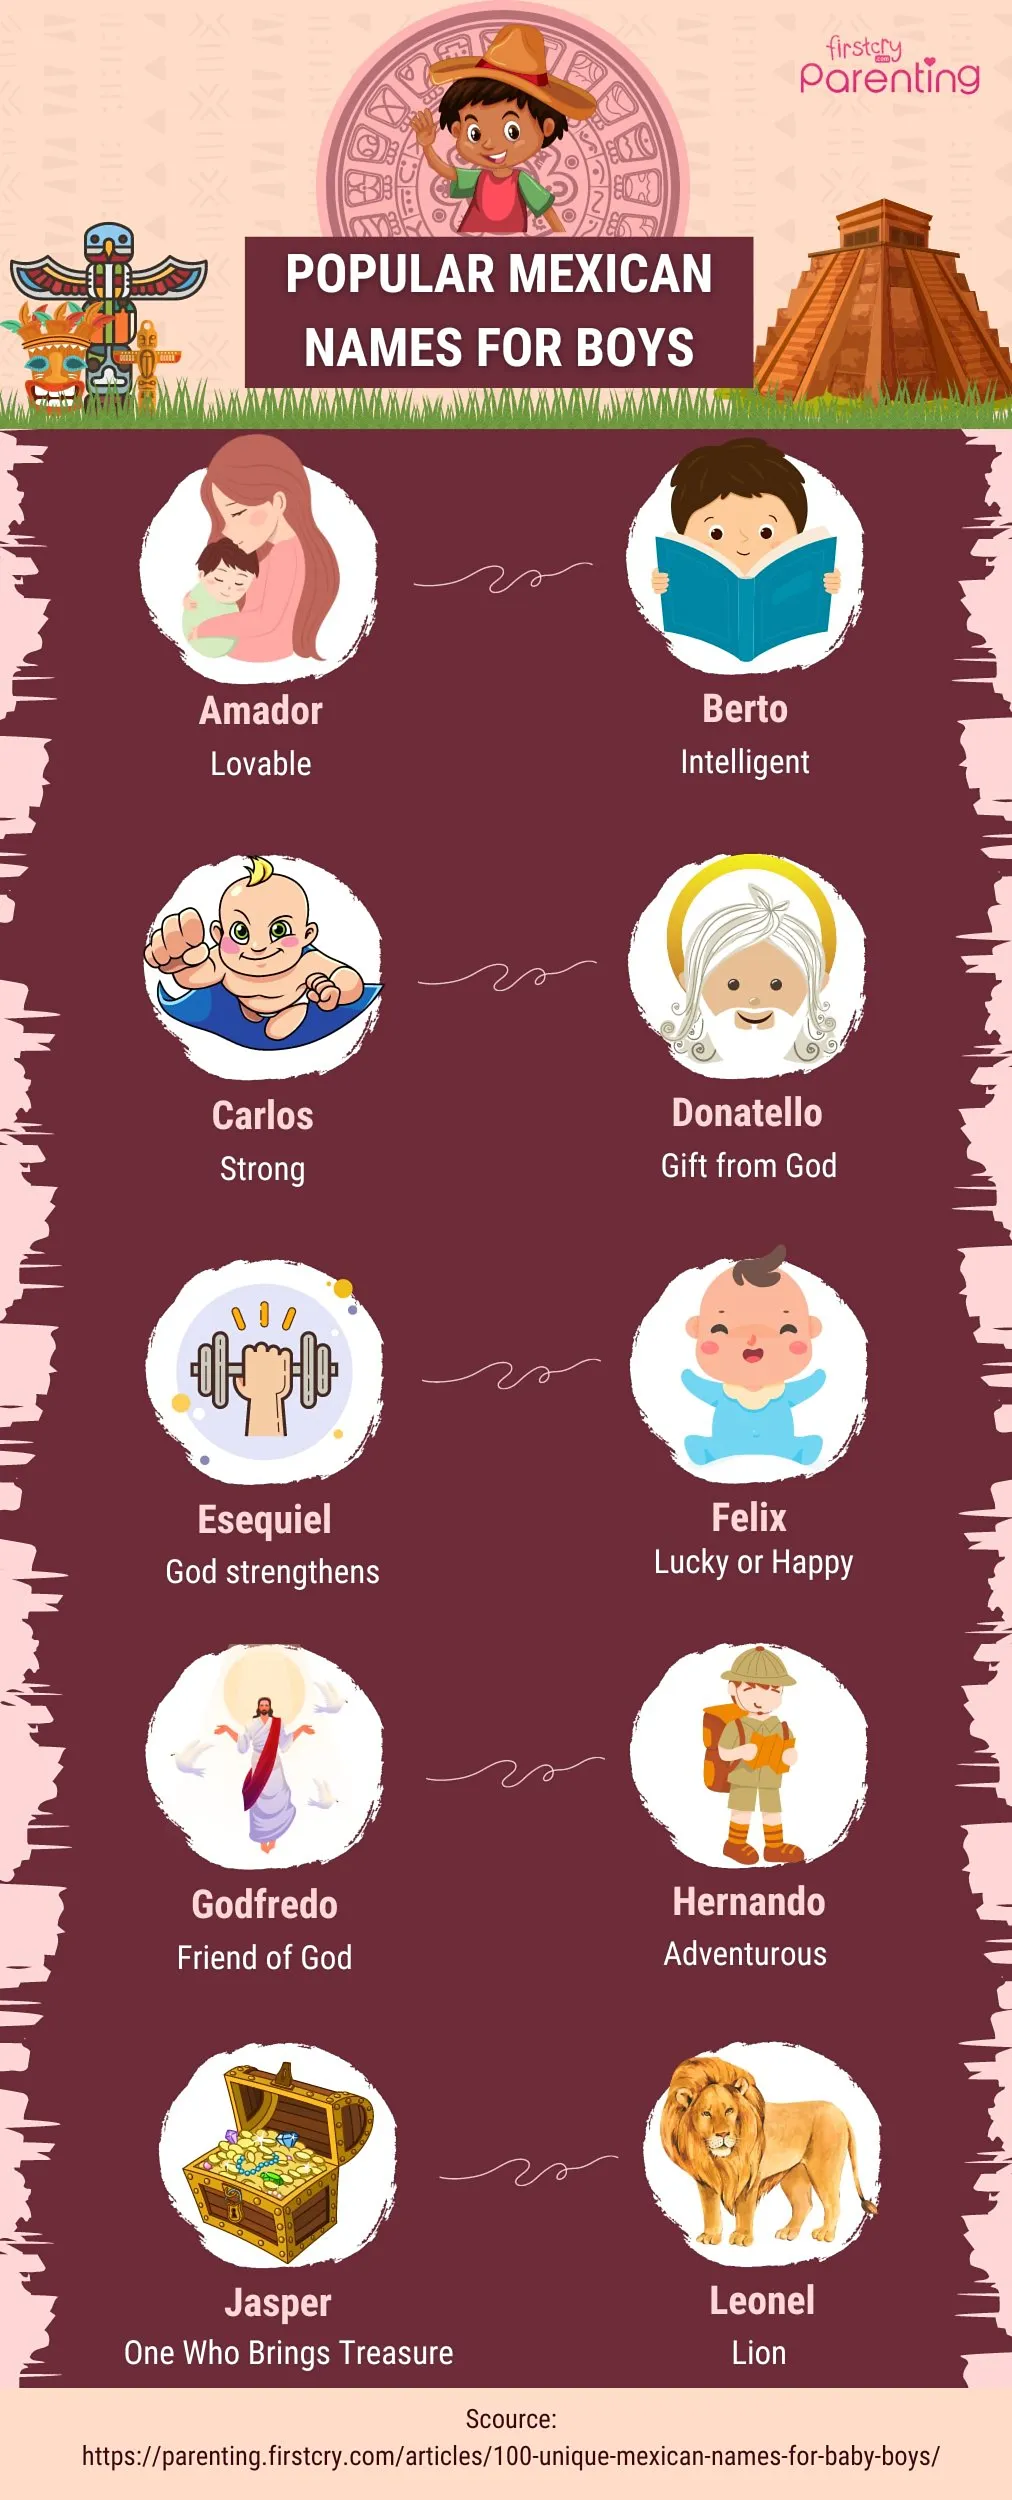 Popular Mexican Names for Boys - Infographic